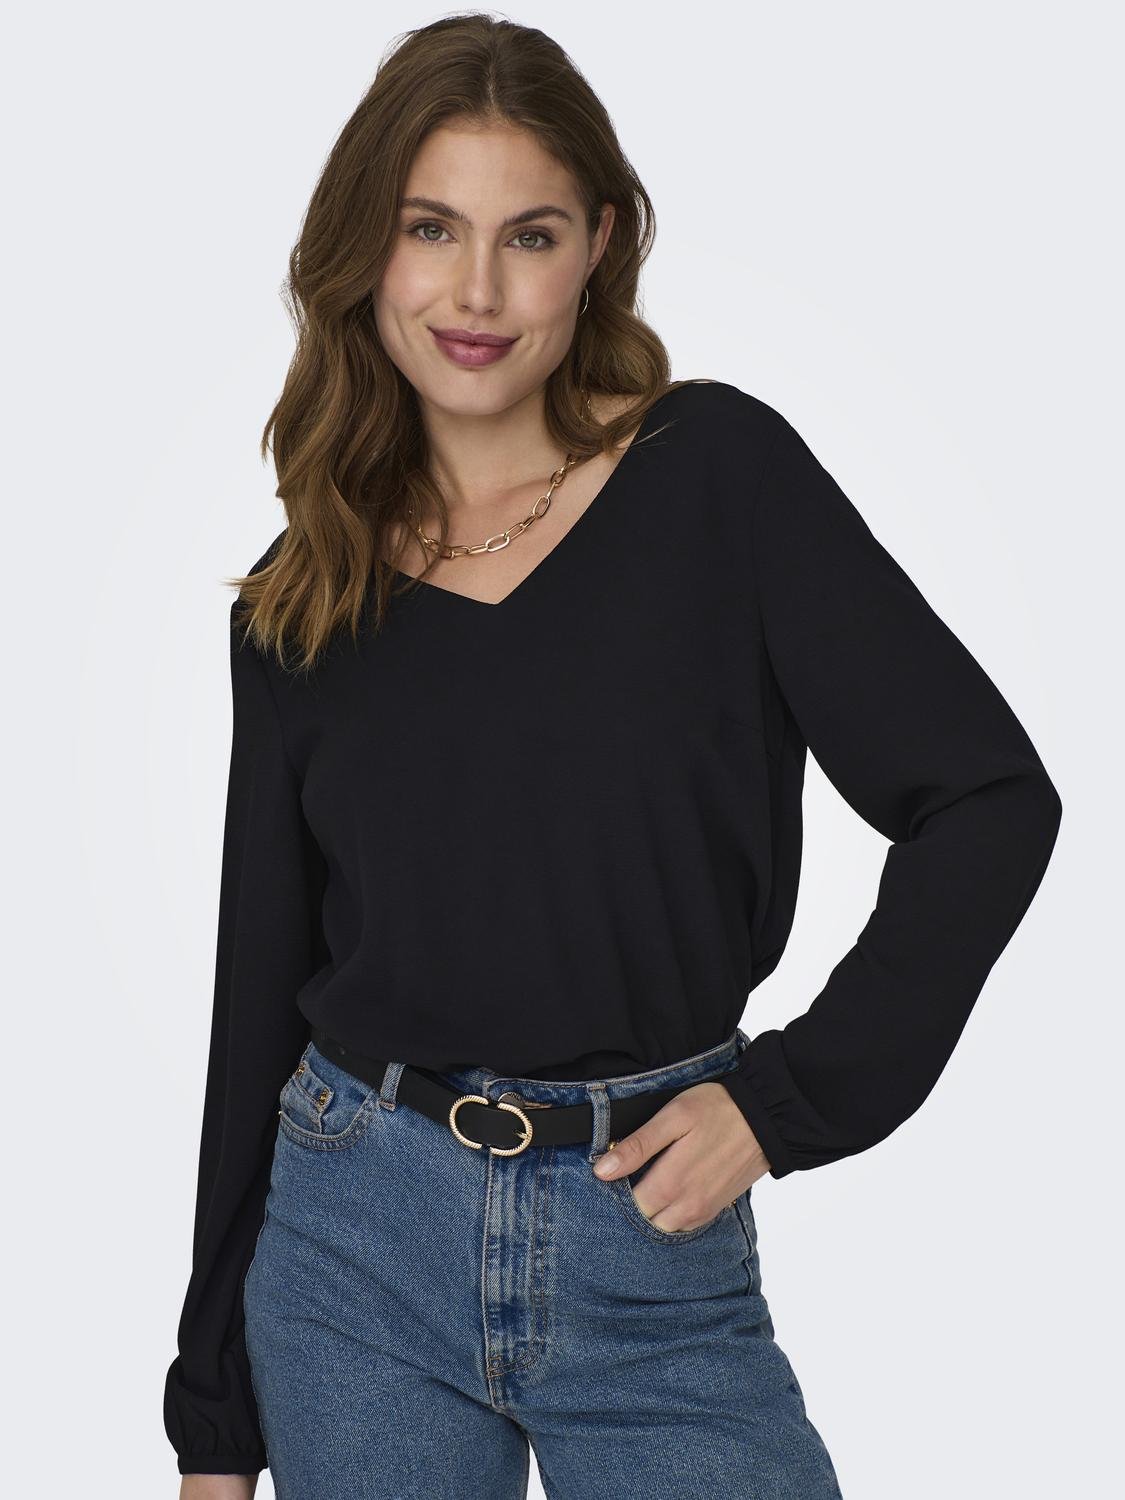 ONLY V-neck top with long sleeves -Black - 15306923